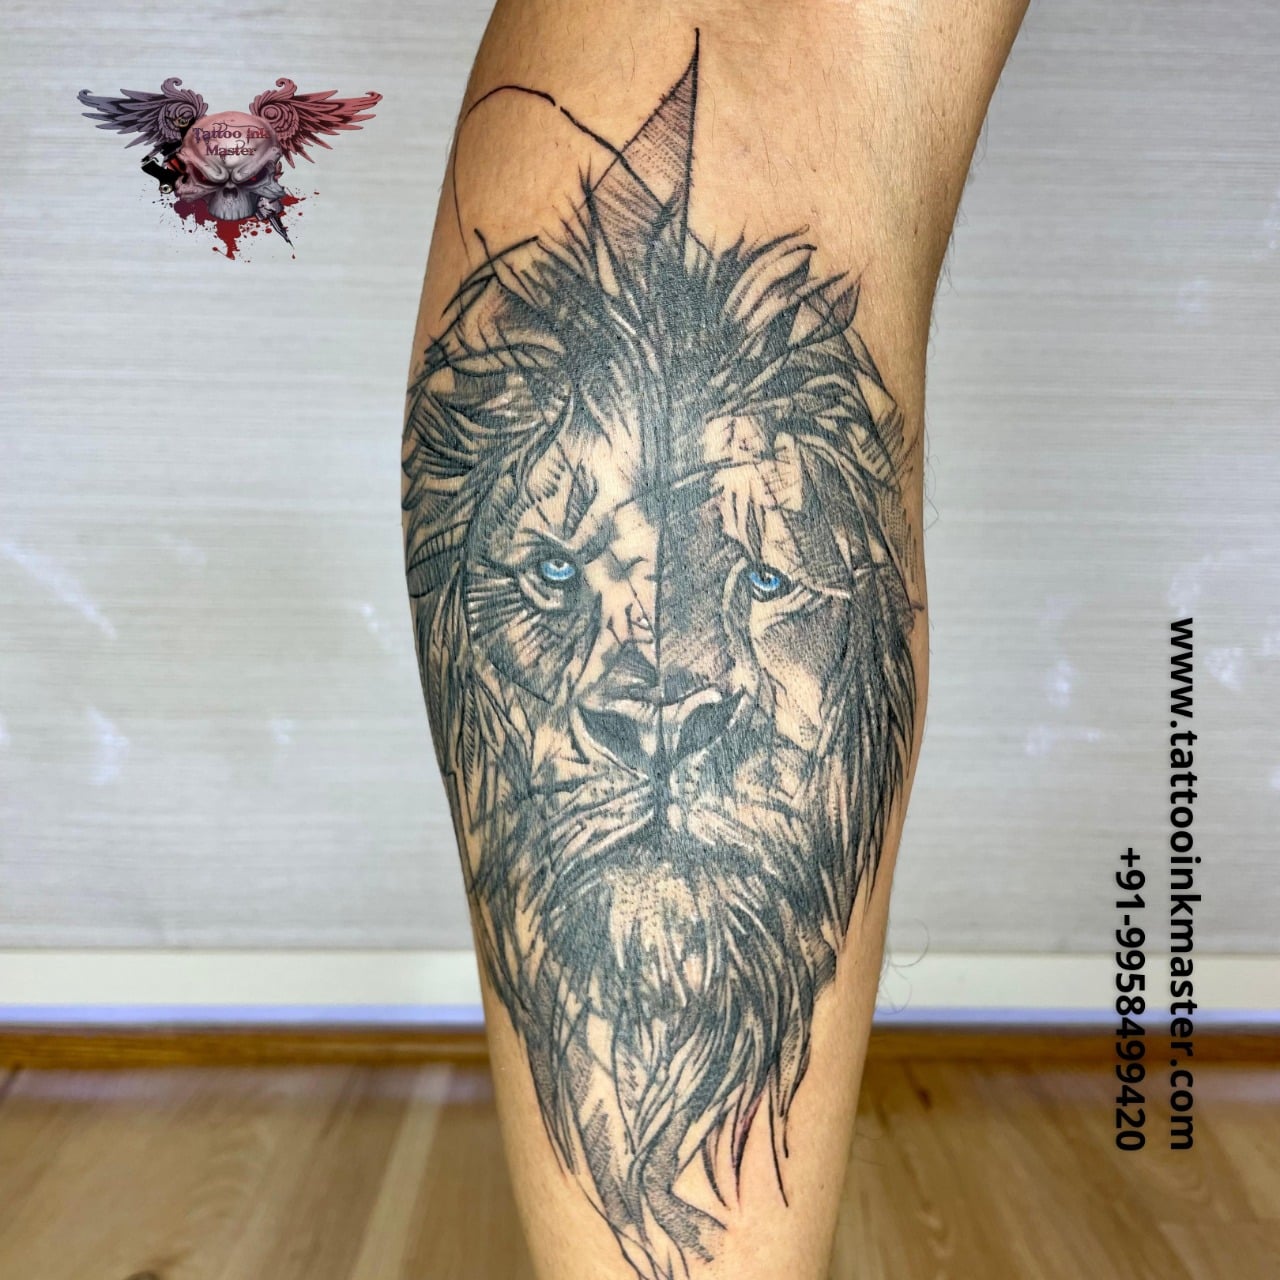 Lion Half Sleeve Tattoo at Rs 600/square inch in Bengaluru | ID: 24217555033